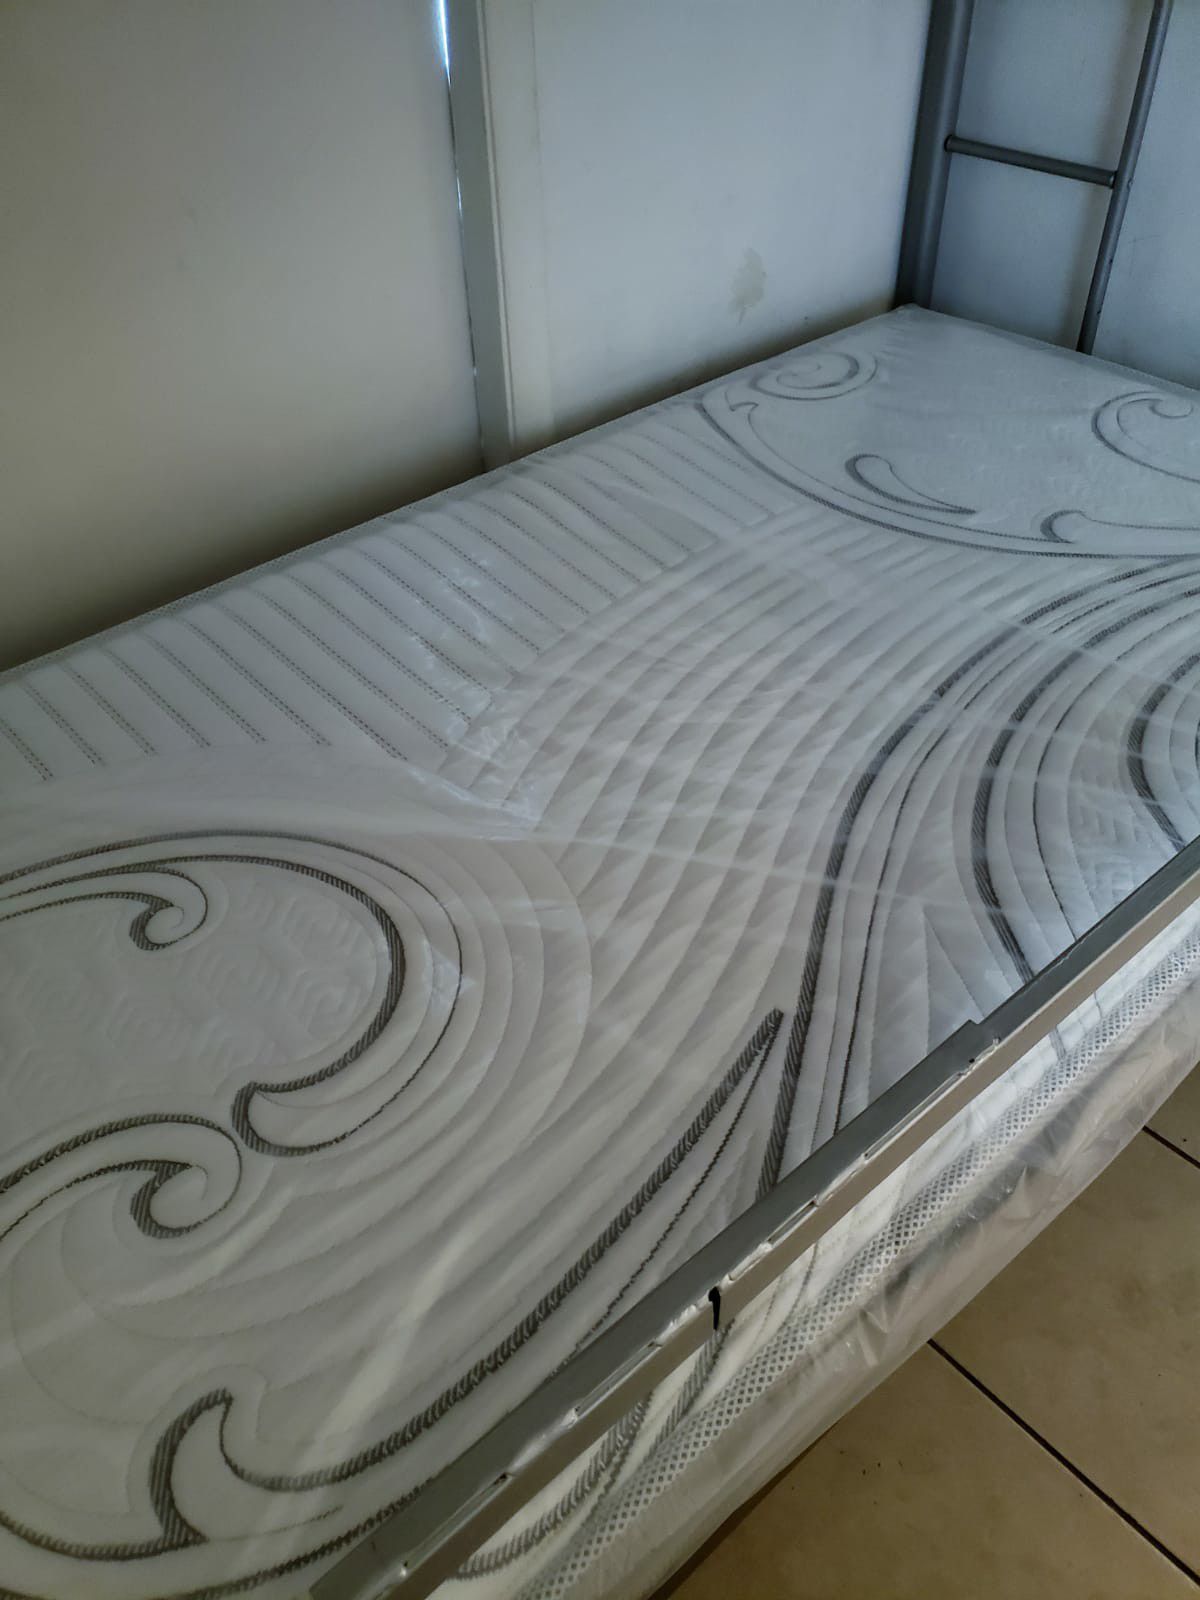 NEW TWIN MATTRESS WITH BOX SPRING. Bed frame is not available. Take it home the same day 👍